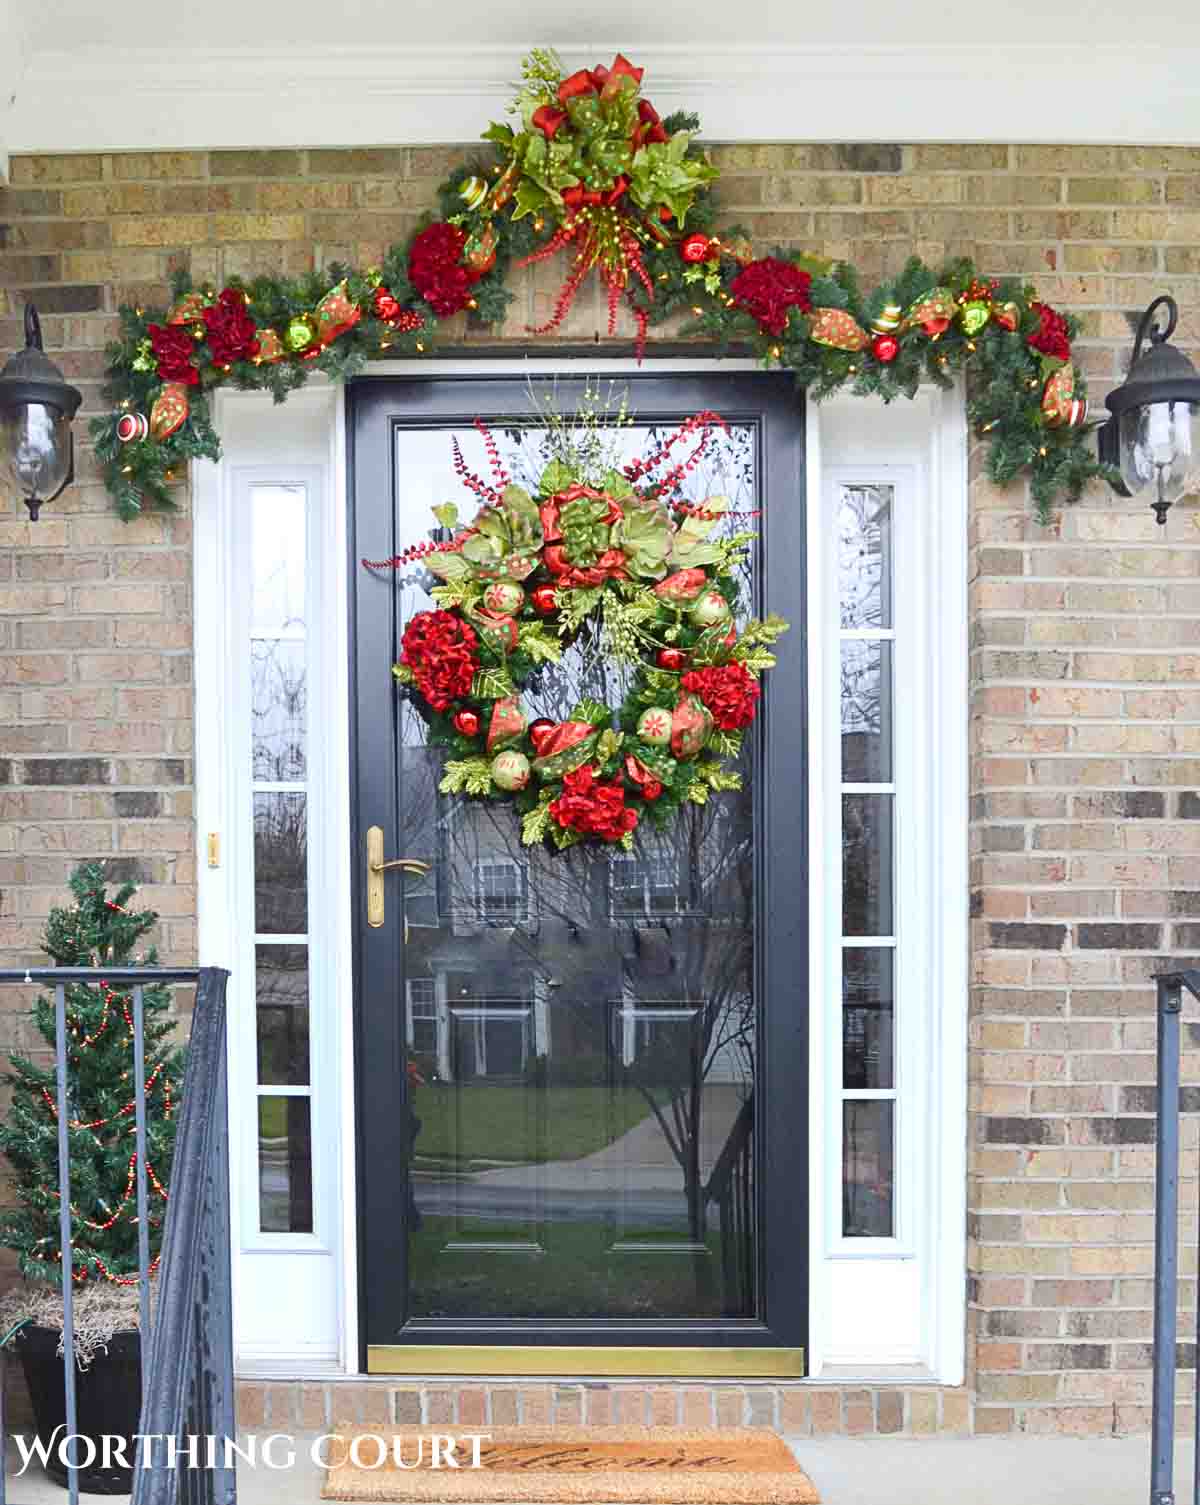 Christmas garland and wreath on a front porch with red hydrangeas